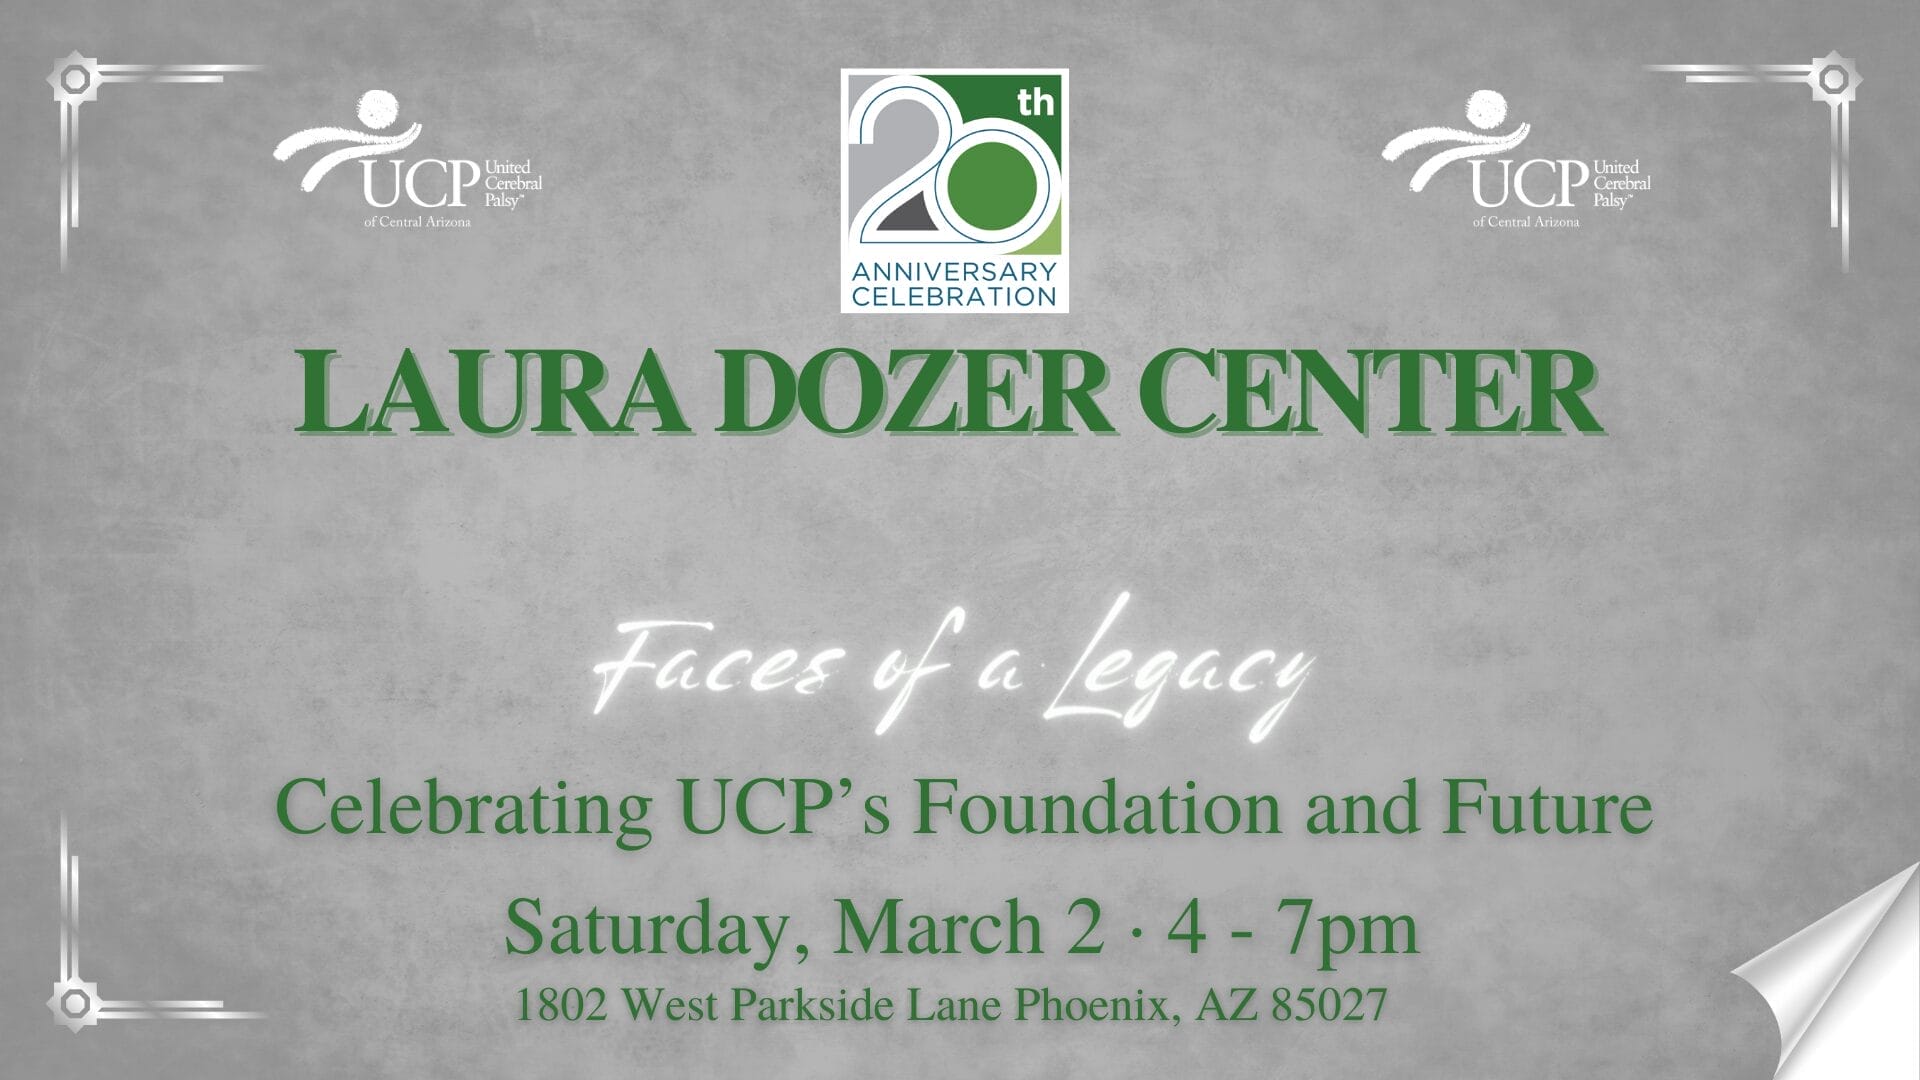 Laura Dozer Center is the dedicated building for UCP of central AZ